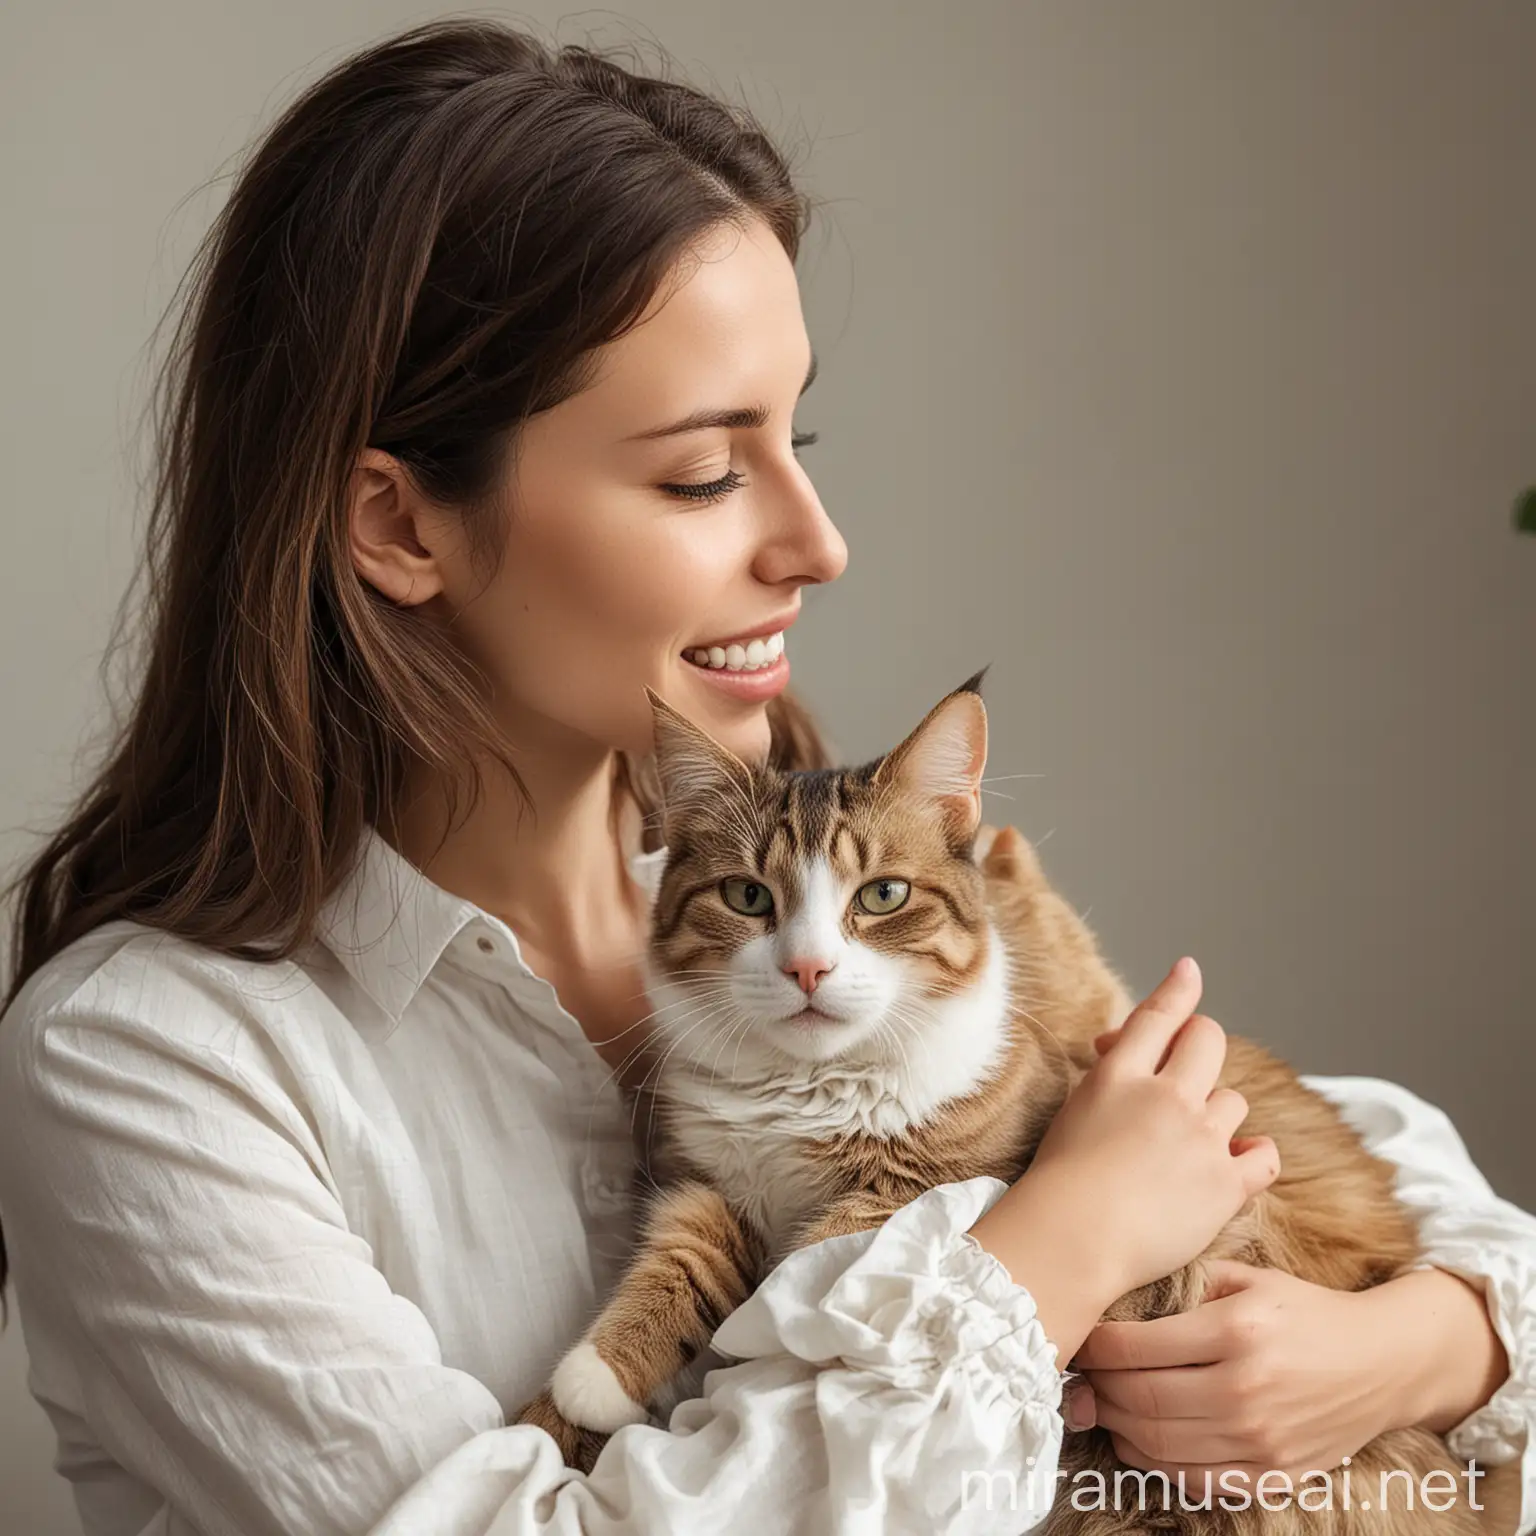 Woman Enjoying Relaxing Moment with Her Feline Companion